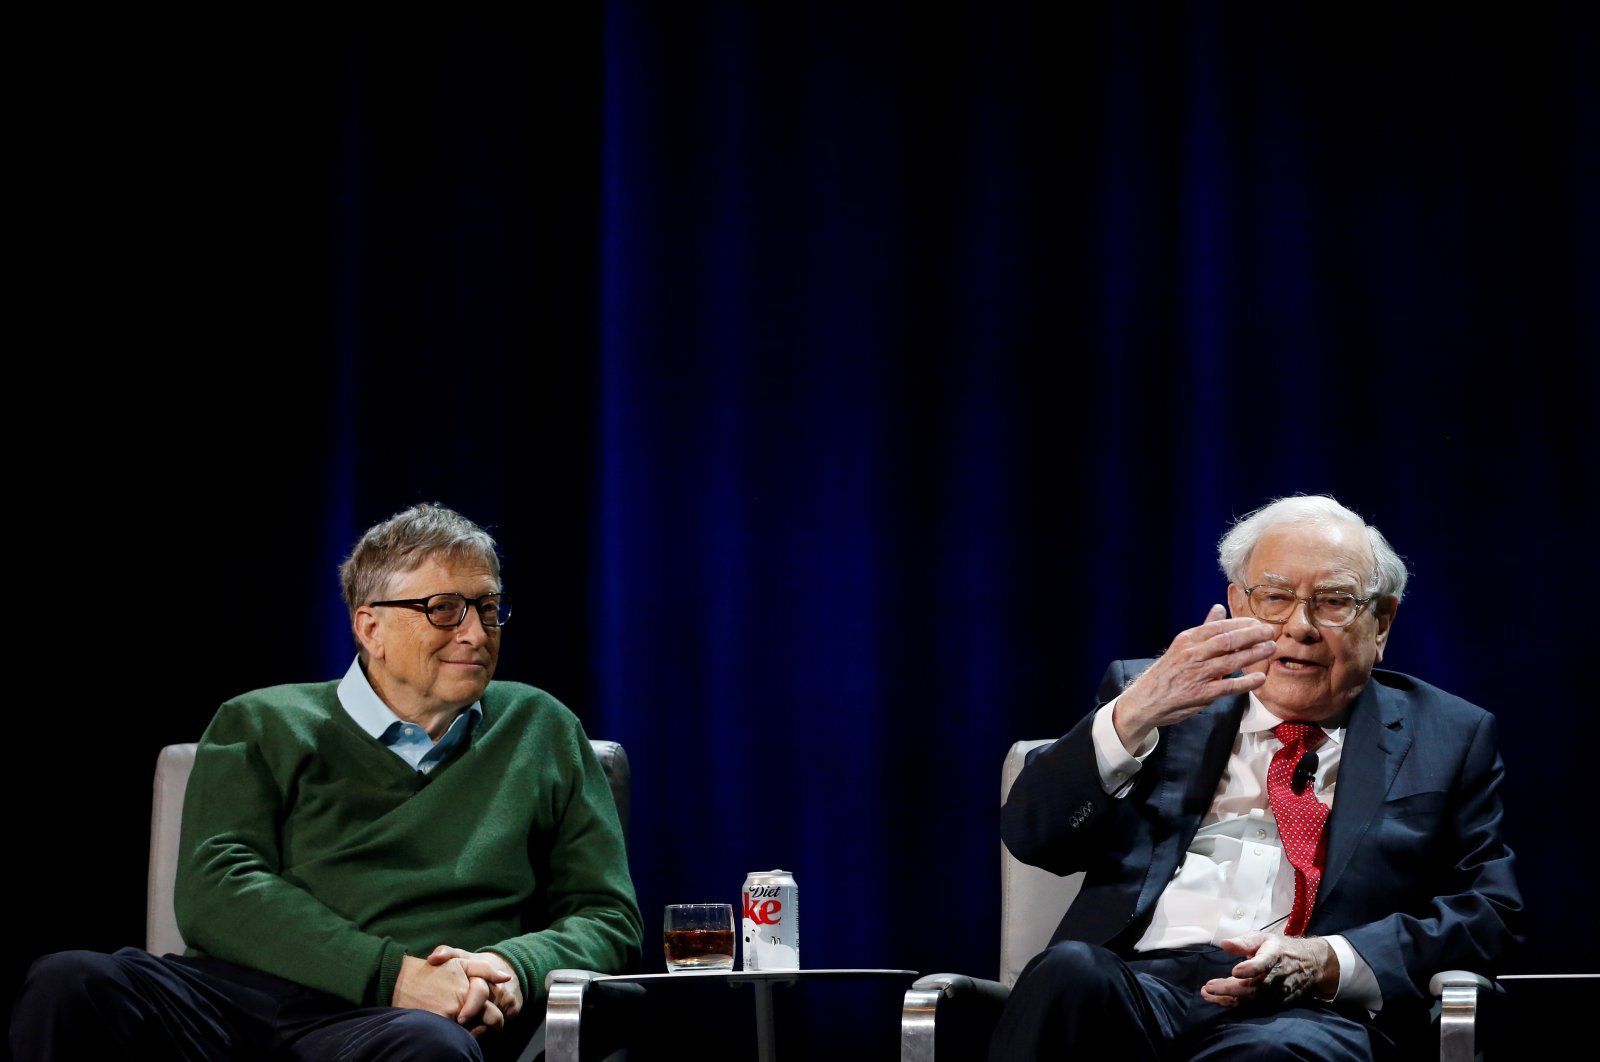 Bill Gates (L) looks on as Warren Buffett (R), chairperson and CEO of Berkshire Hathaway, speaks at Columbia University in New York, U.S., Jan. 27, 2017. (Reuters Photo)